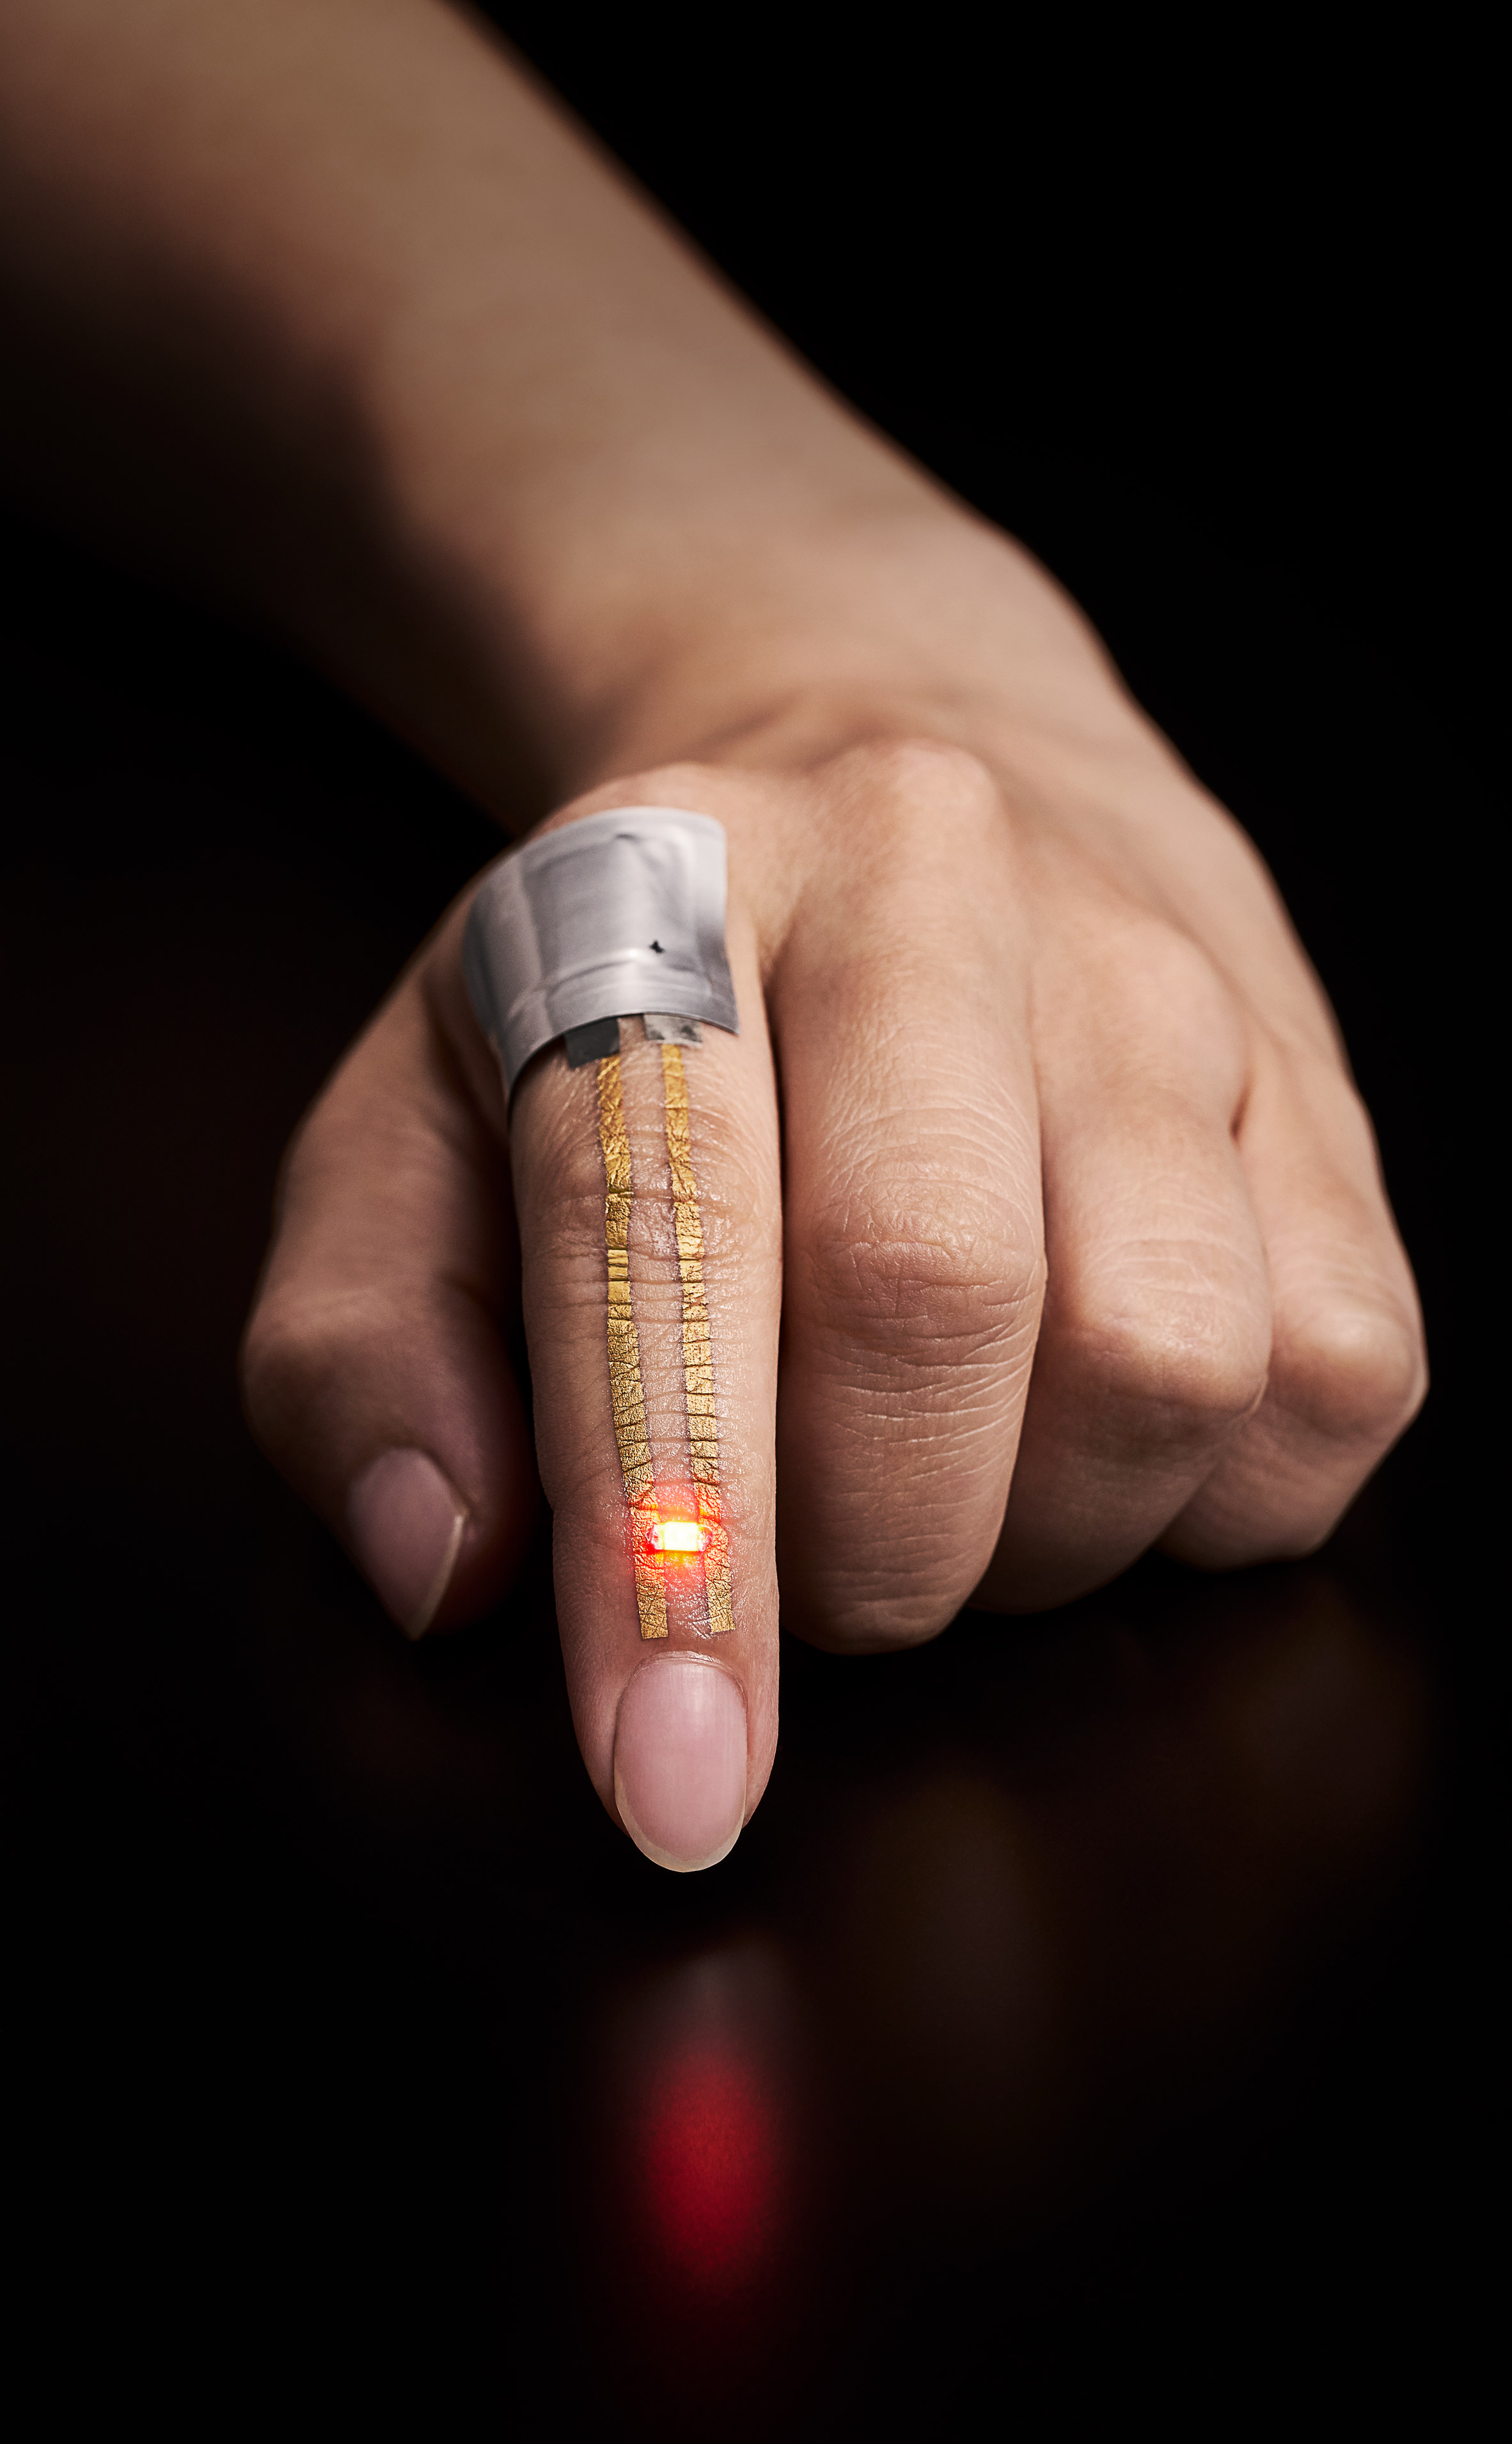 Wearable electronics developed by the University of Tokyo